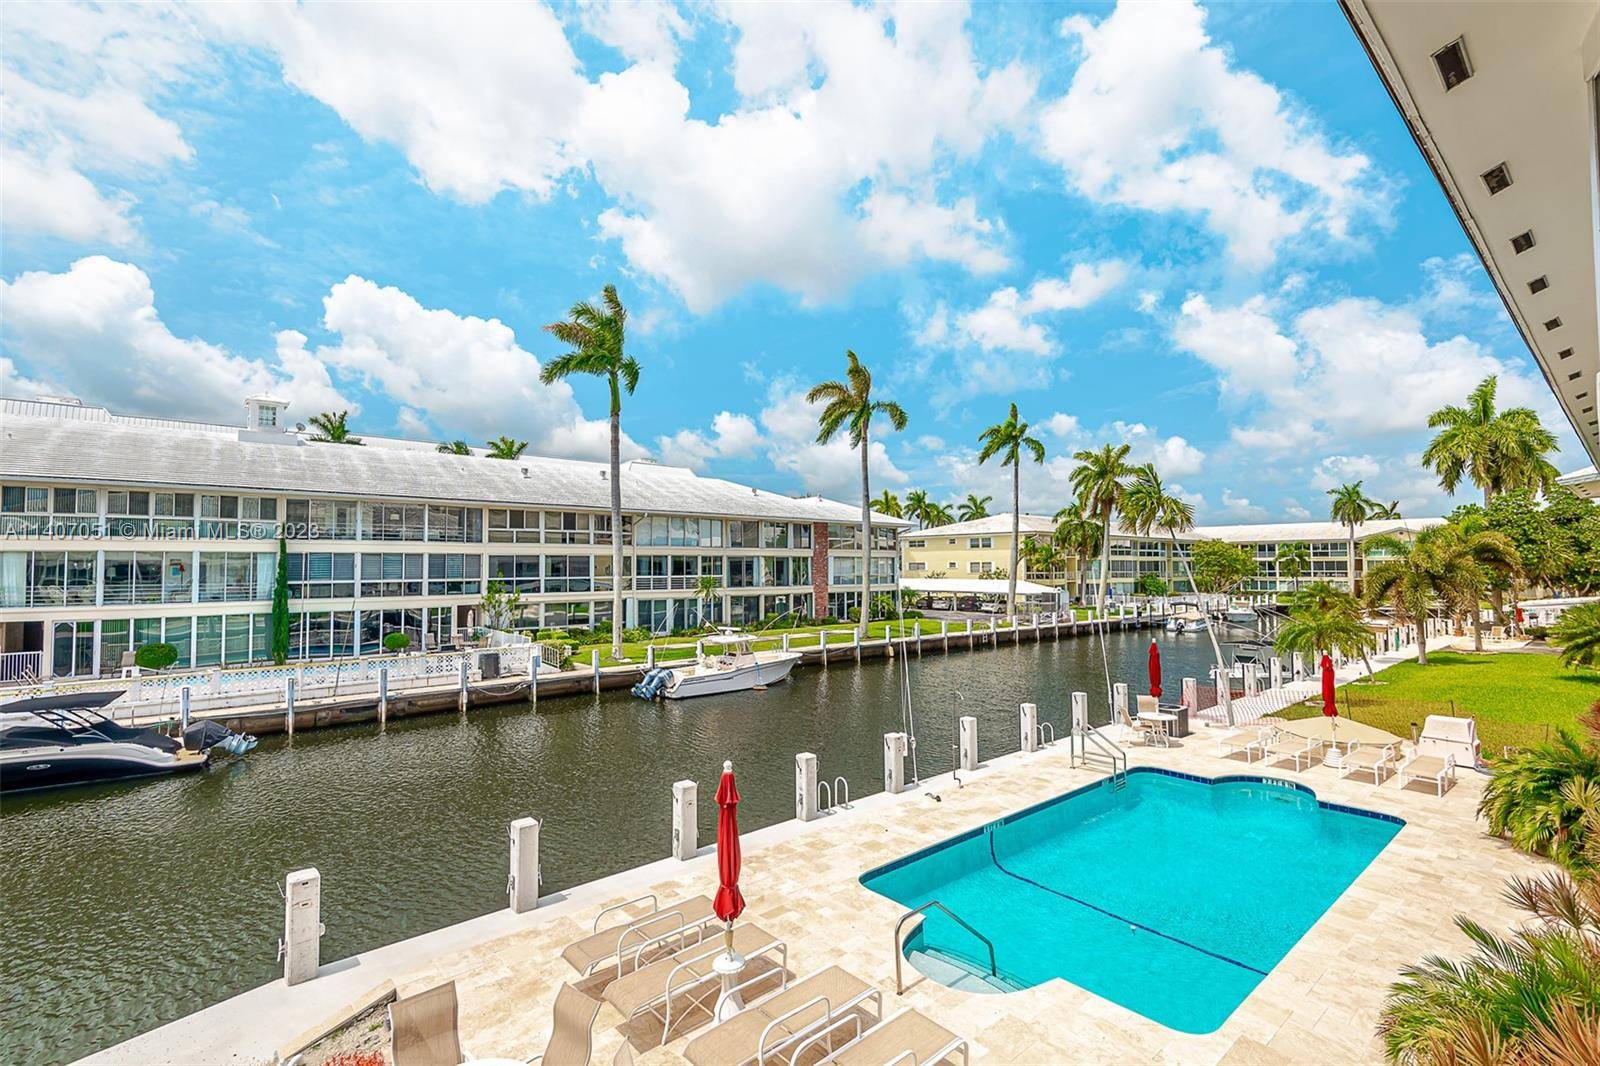 AMAZING FULLY FURNISHED WATERFRONT CONDO IN THE CORAL RIDGE COUNTRY CLUB AREA.